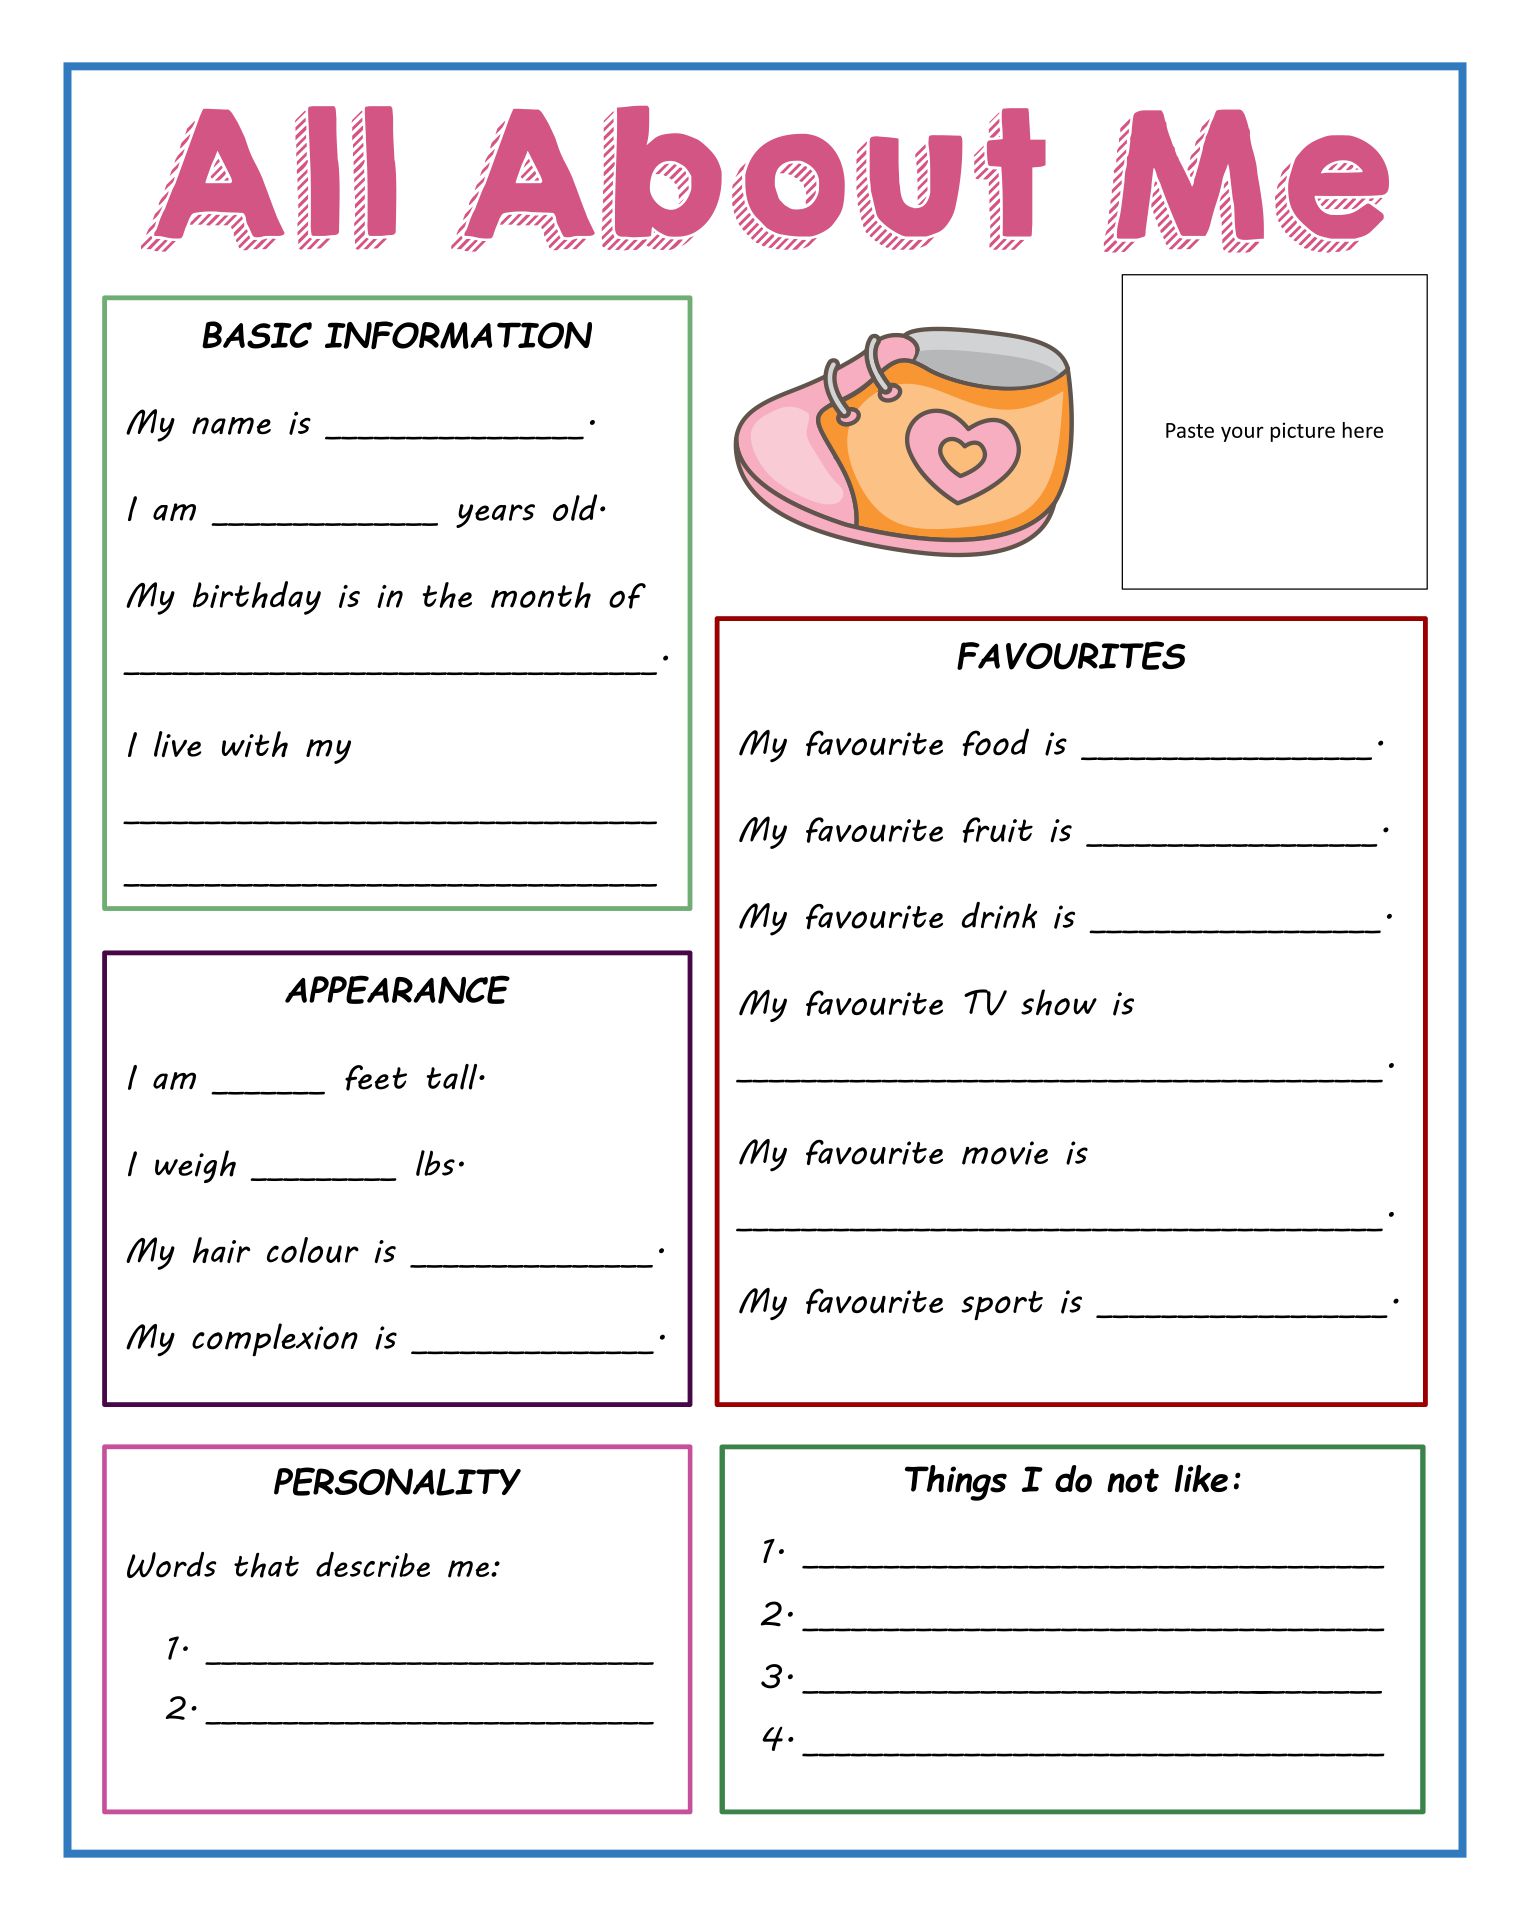 All About Me Form For High School - 20 Free PDF Printables | Printablee